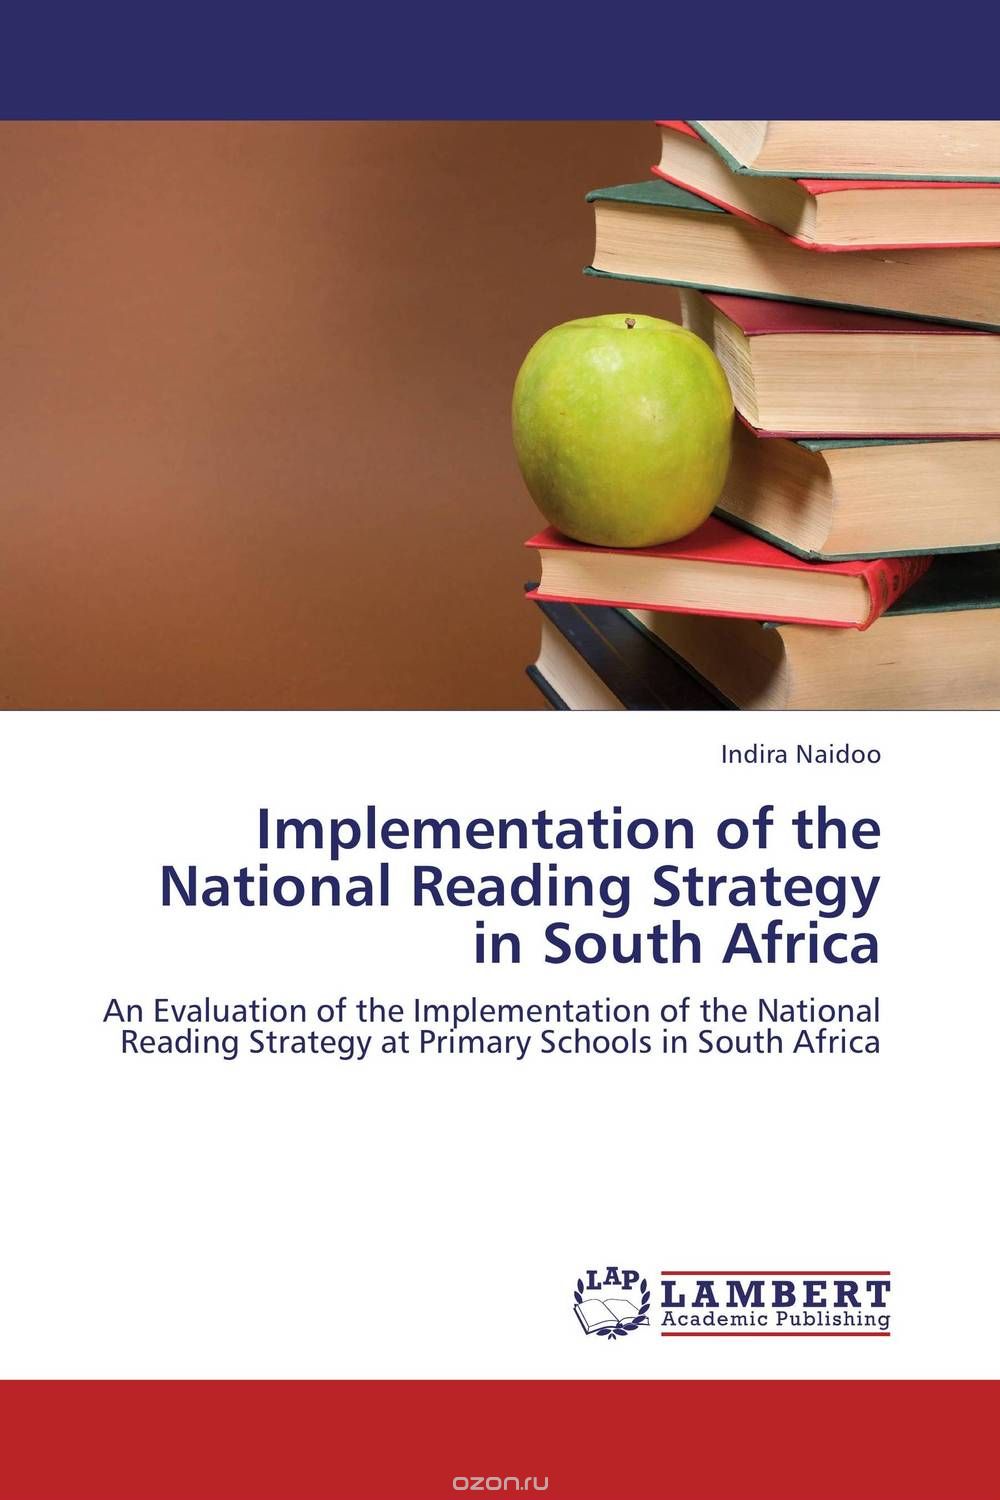 Implementation of the National Reading Strategy in South Africa